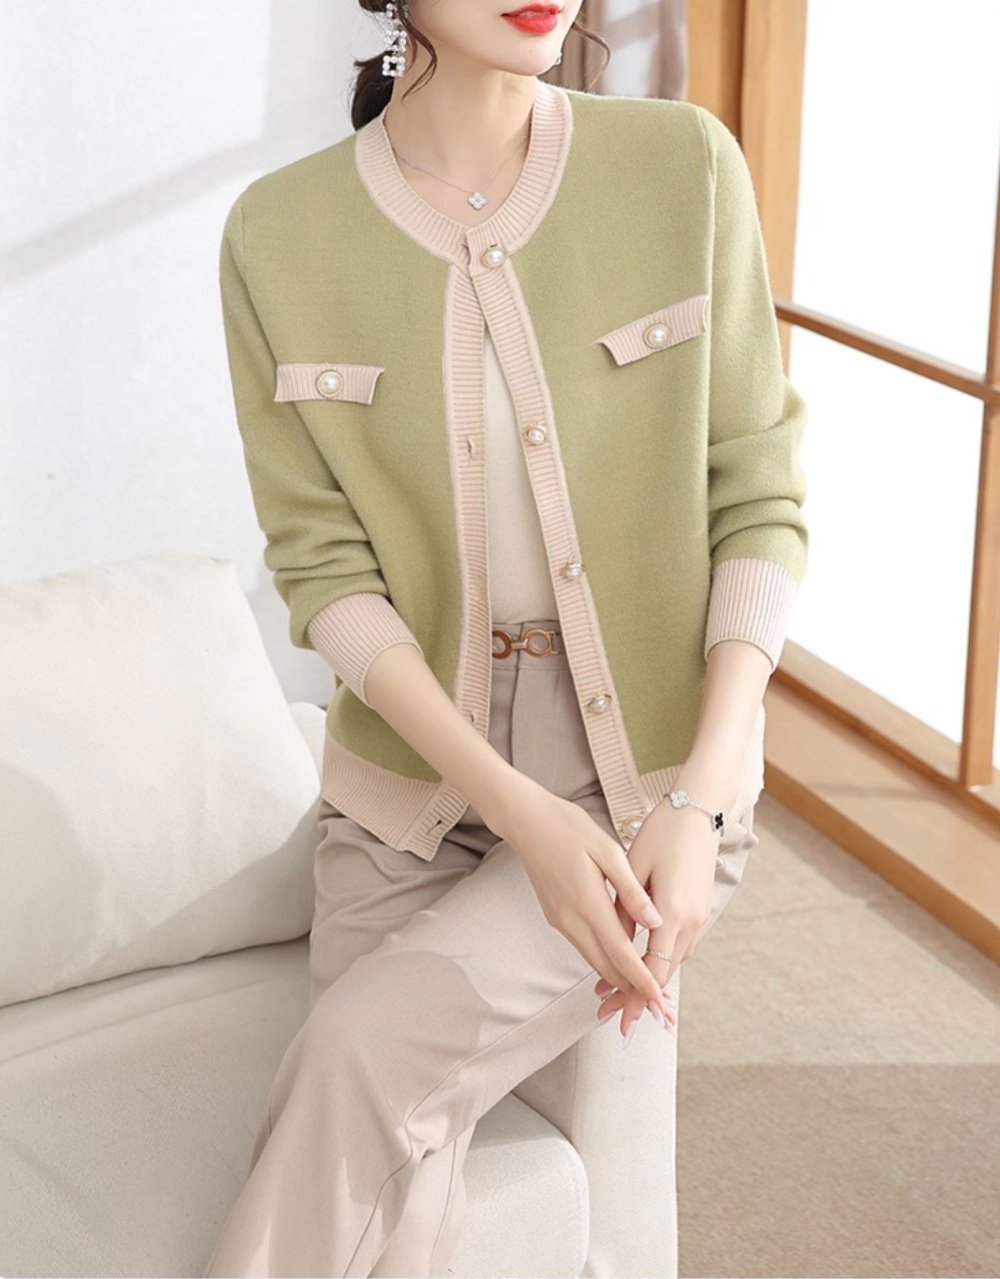 Temperament tops spring and autumn cardigan for women